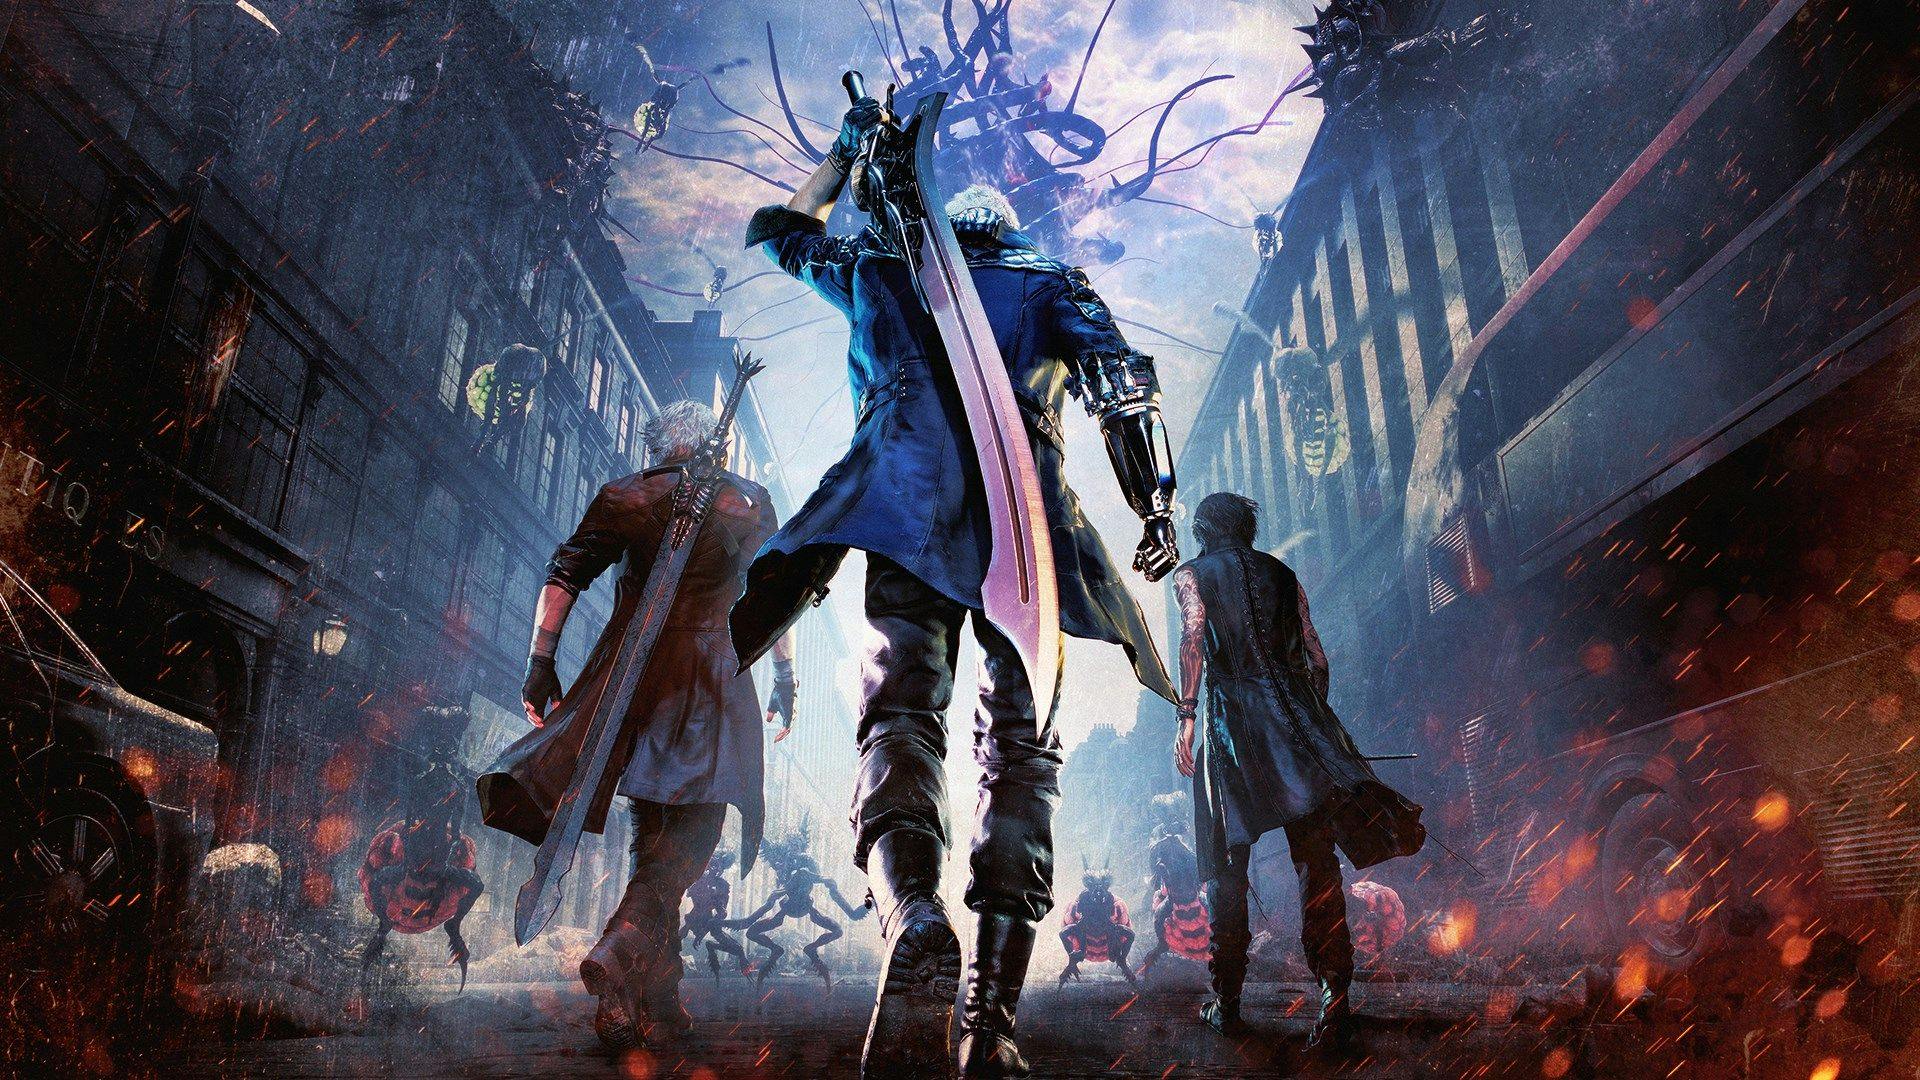 DEVIL MAY CRY 5 Banner Image